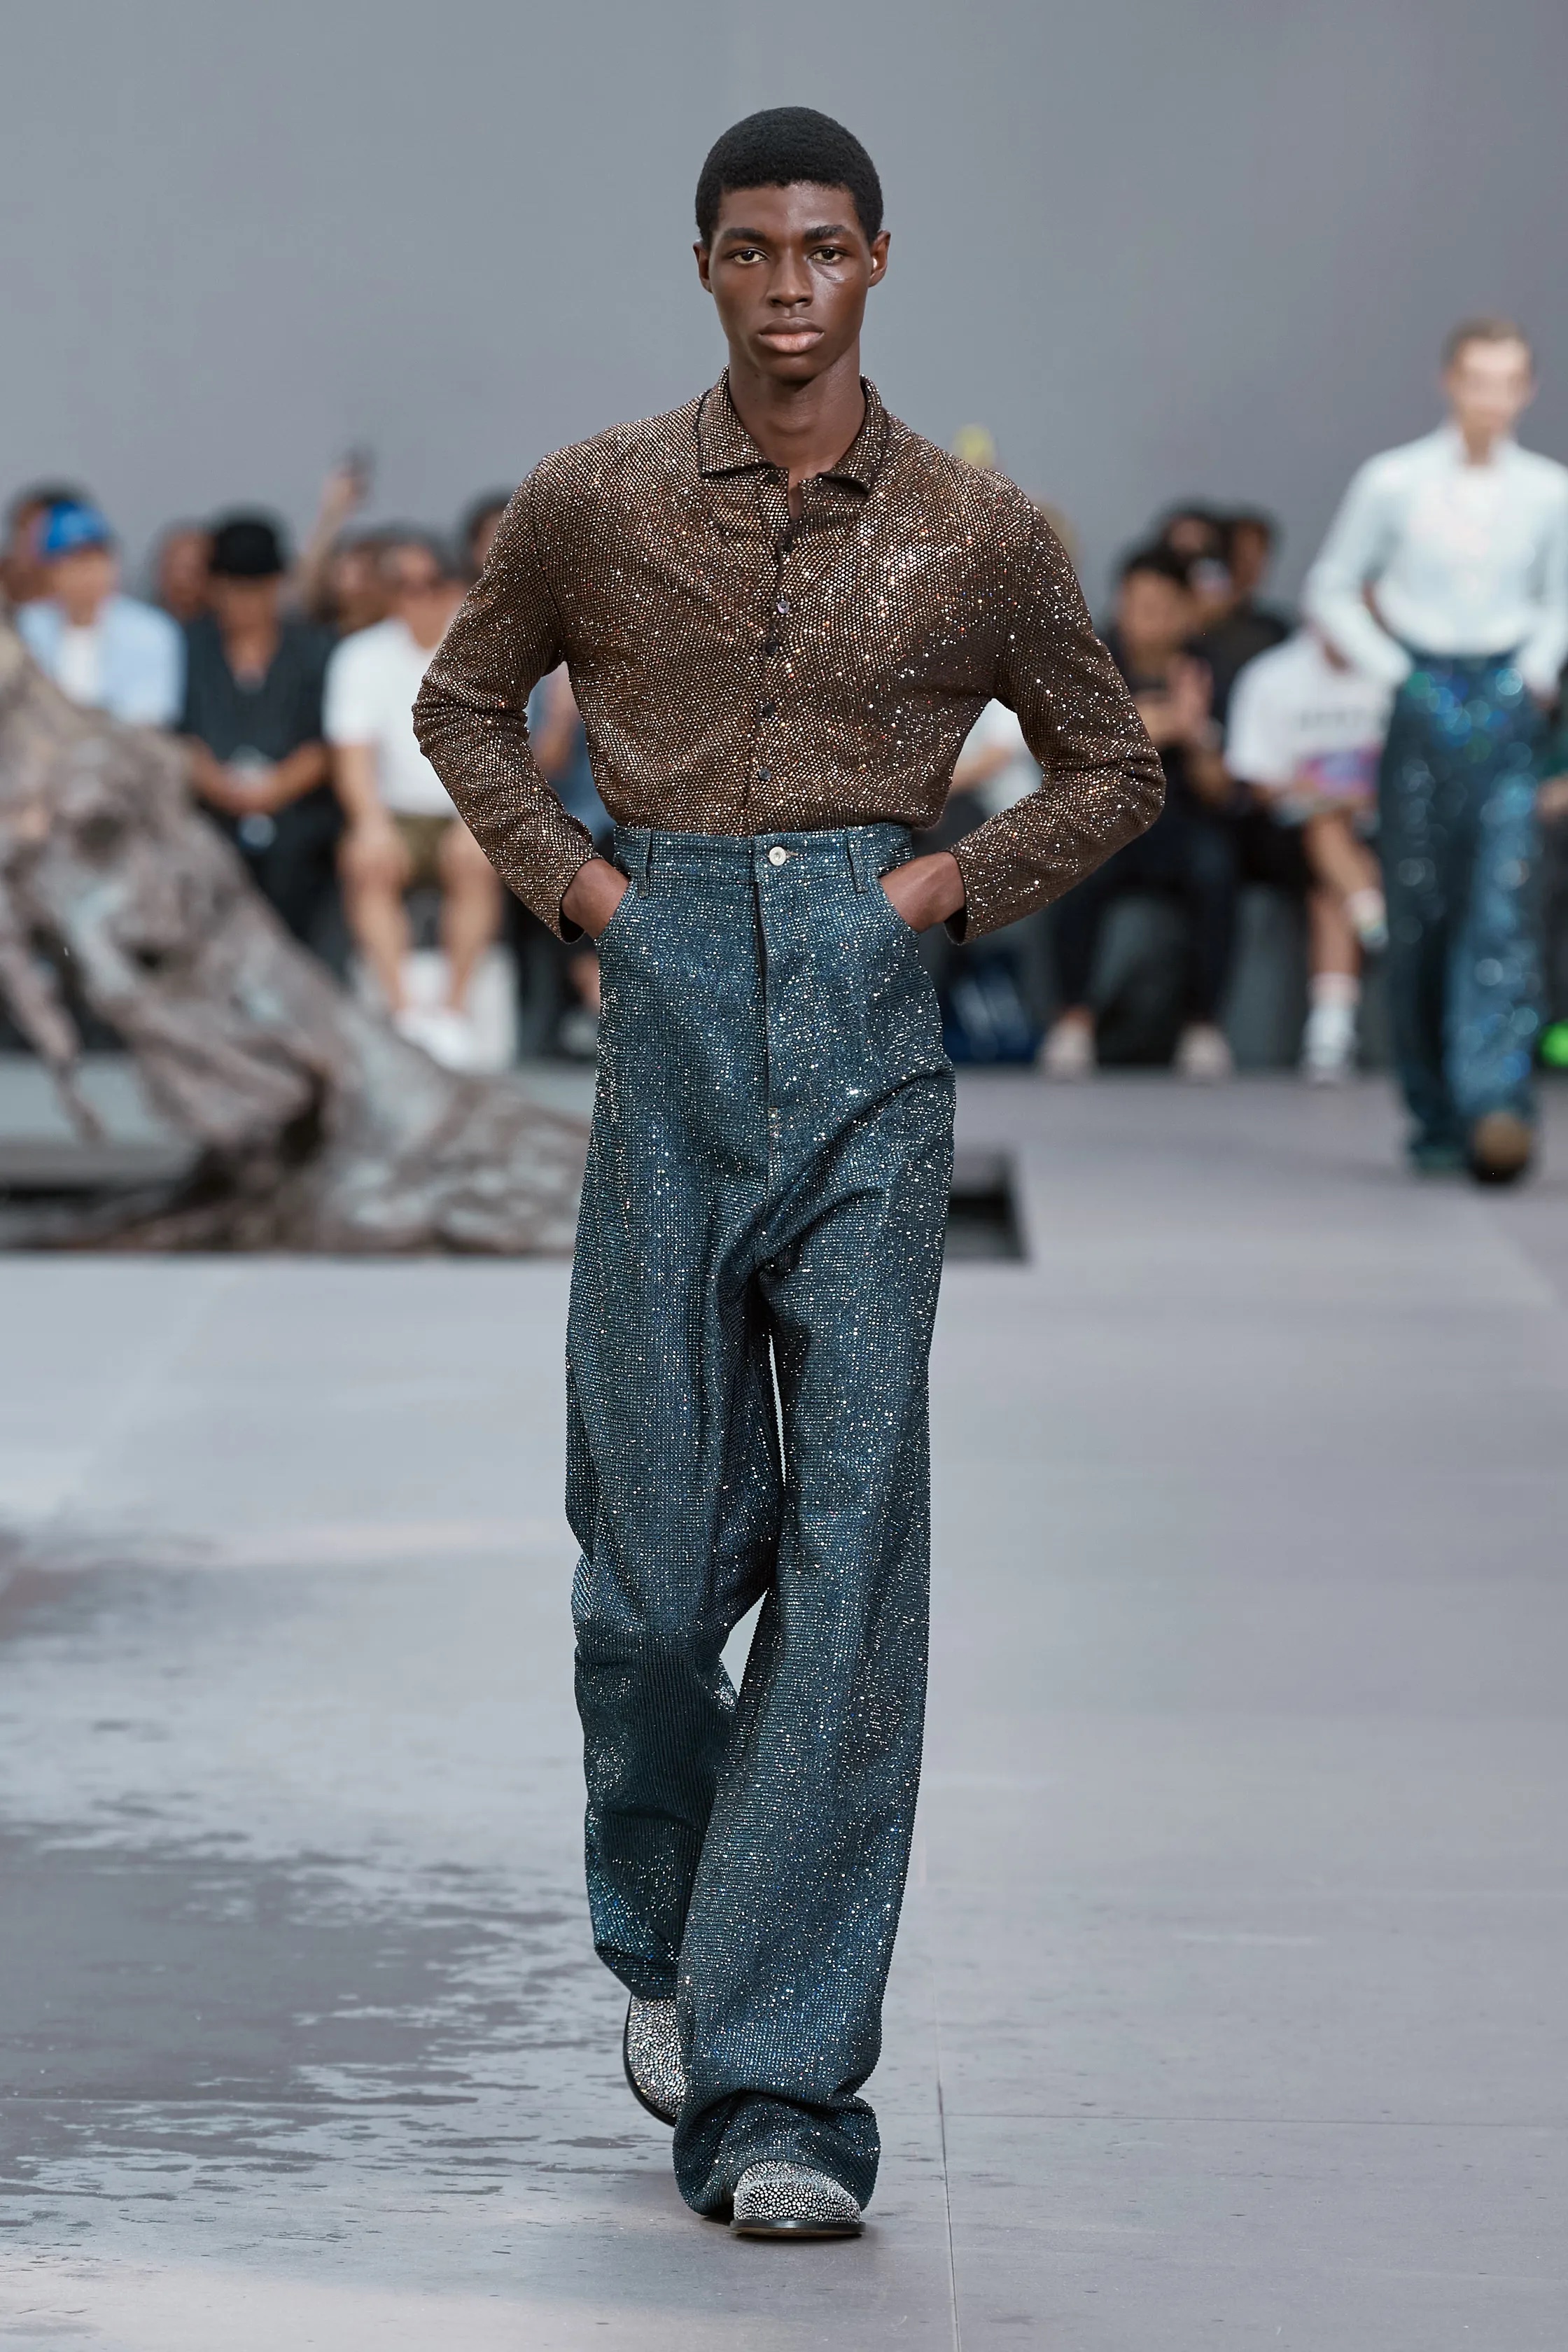 Loewe Brought Sparkles, High-Waisted Jeans And Leather Full Body Outfits to  Paris Men's Fashion Week - A&E Magazine